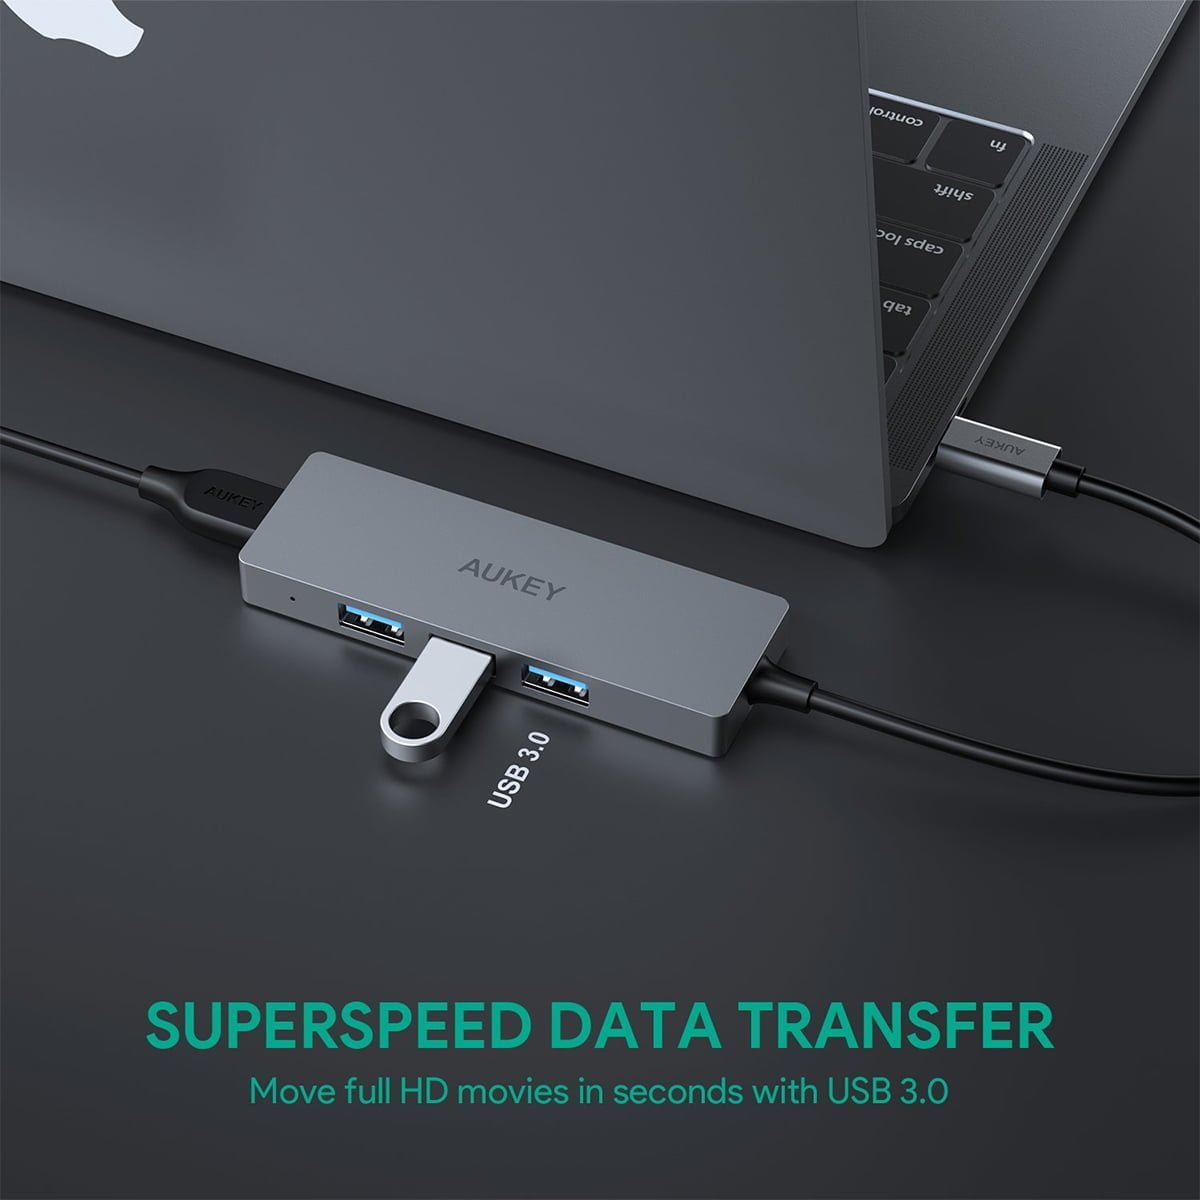 SUPER SPEED DATA TRANSFER Move full HD movies in seconds with USB 3.0